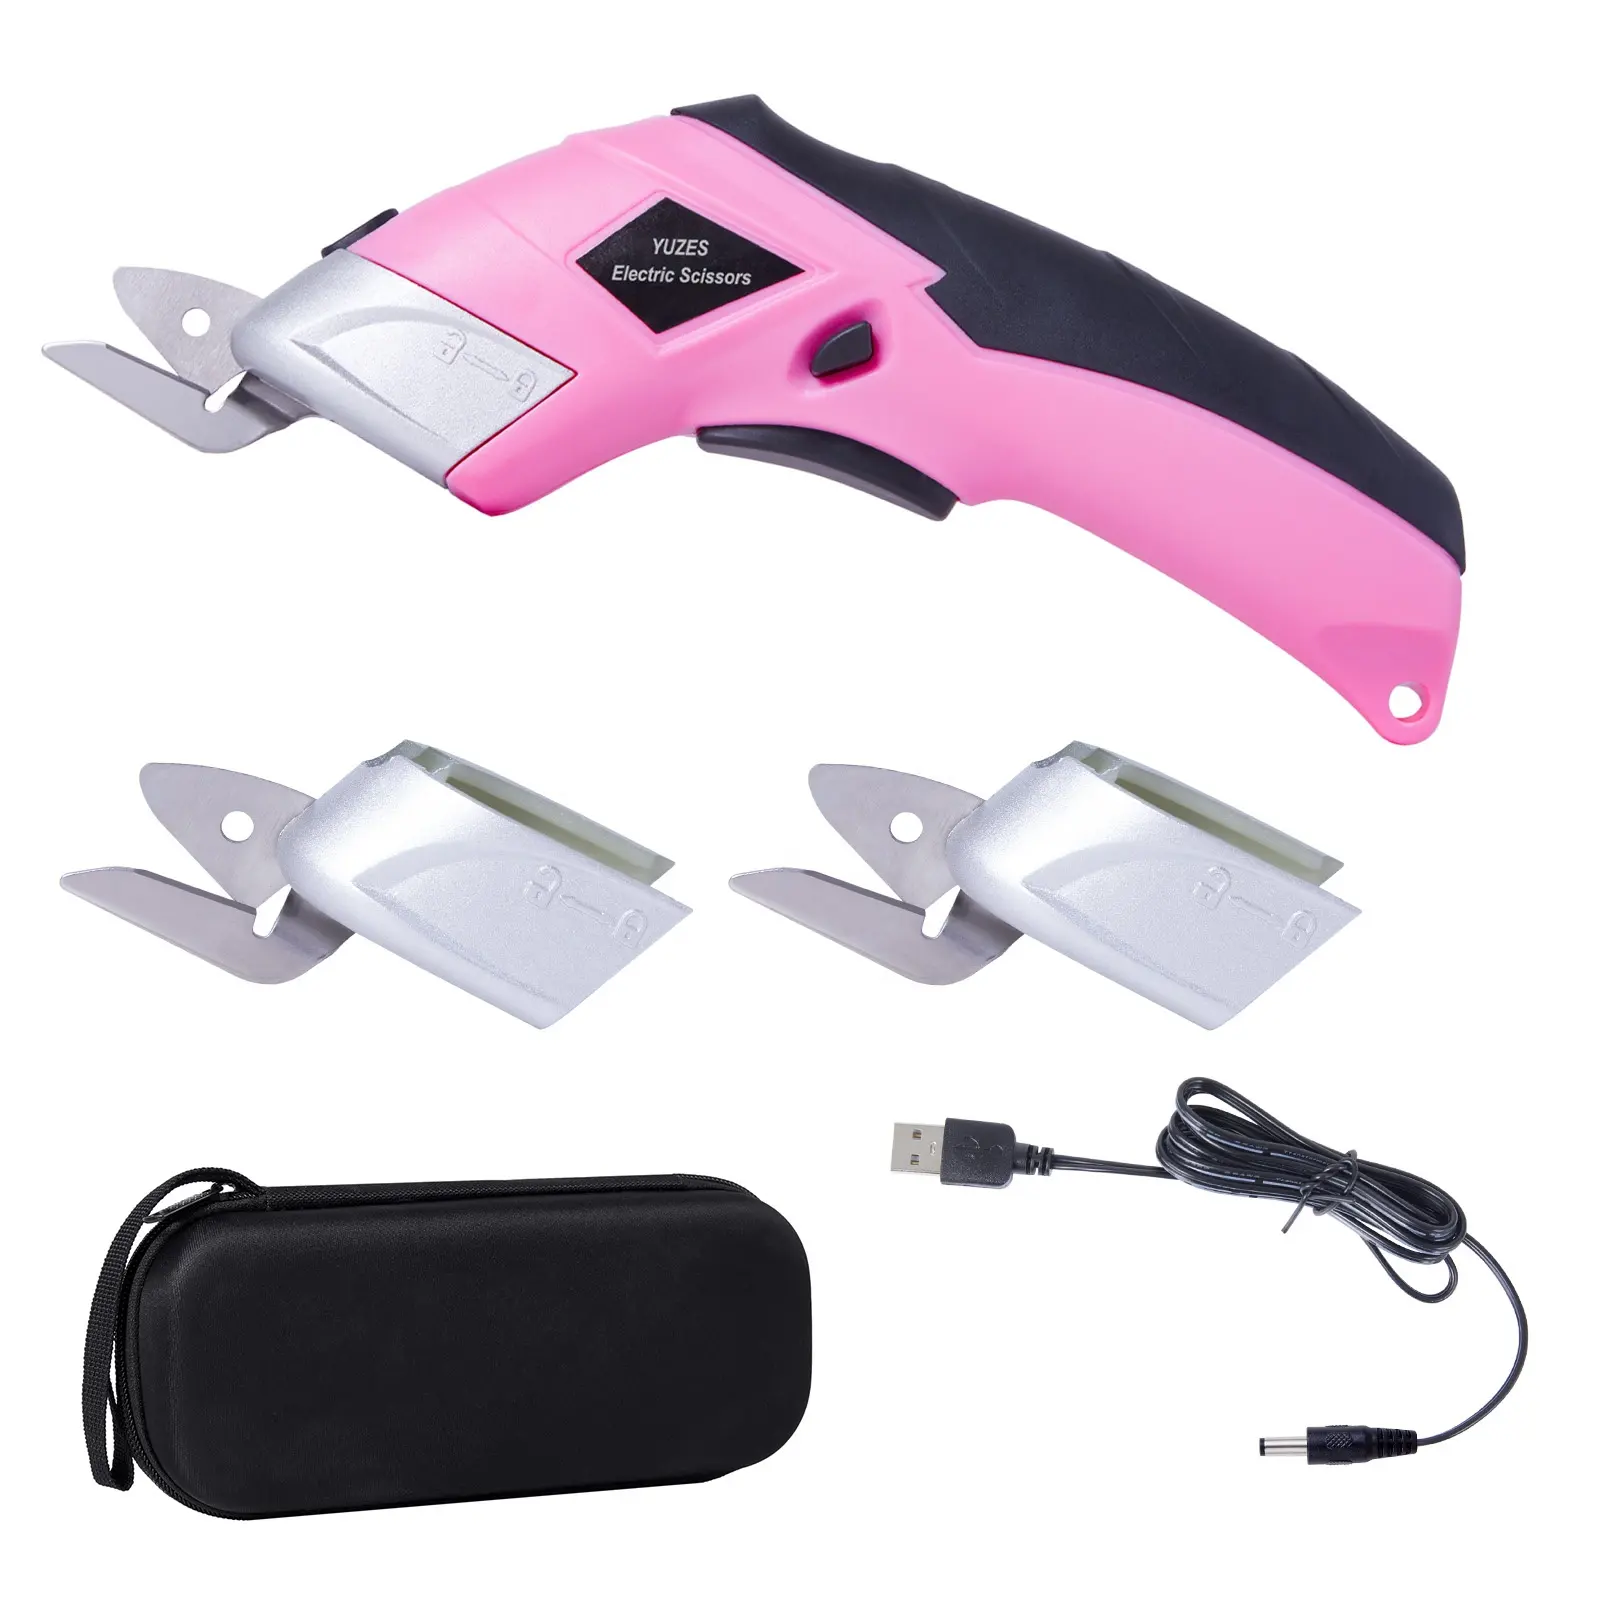 USB Rechargeable 2 Blades Sewing Cutting Fabric and Leather Electric Scissors Cordless Scissors Cutter Shears